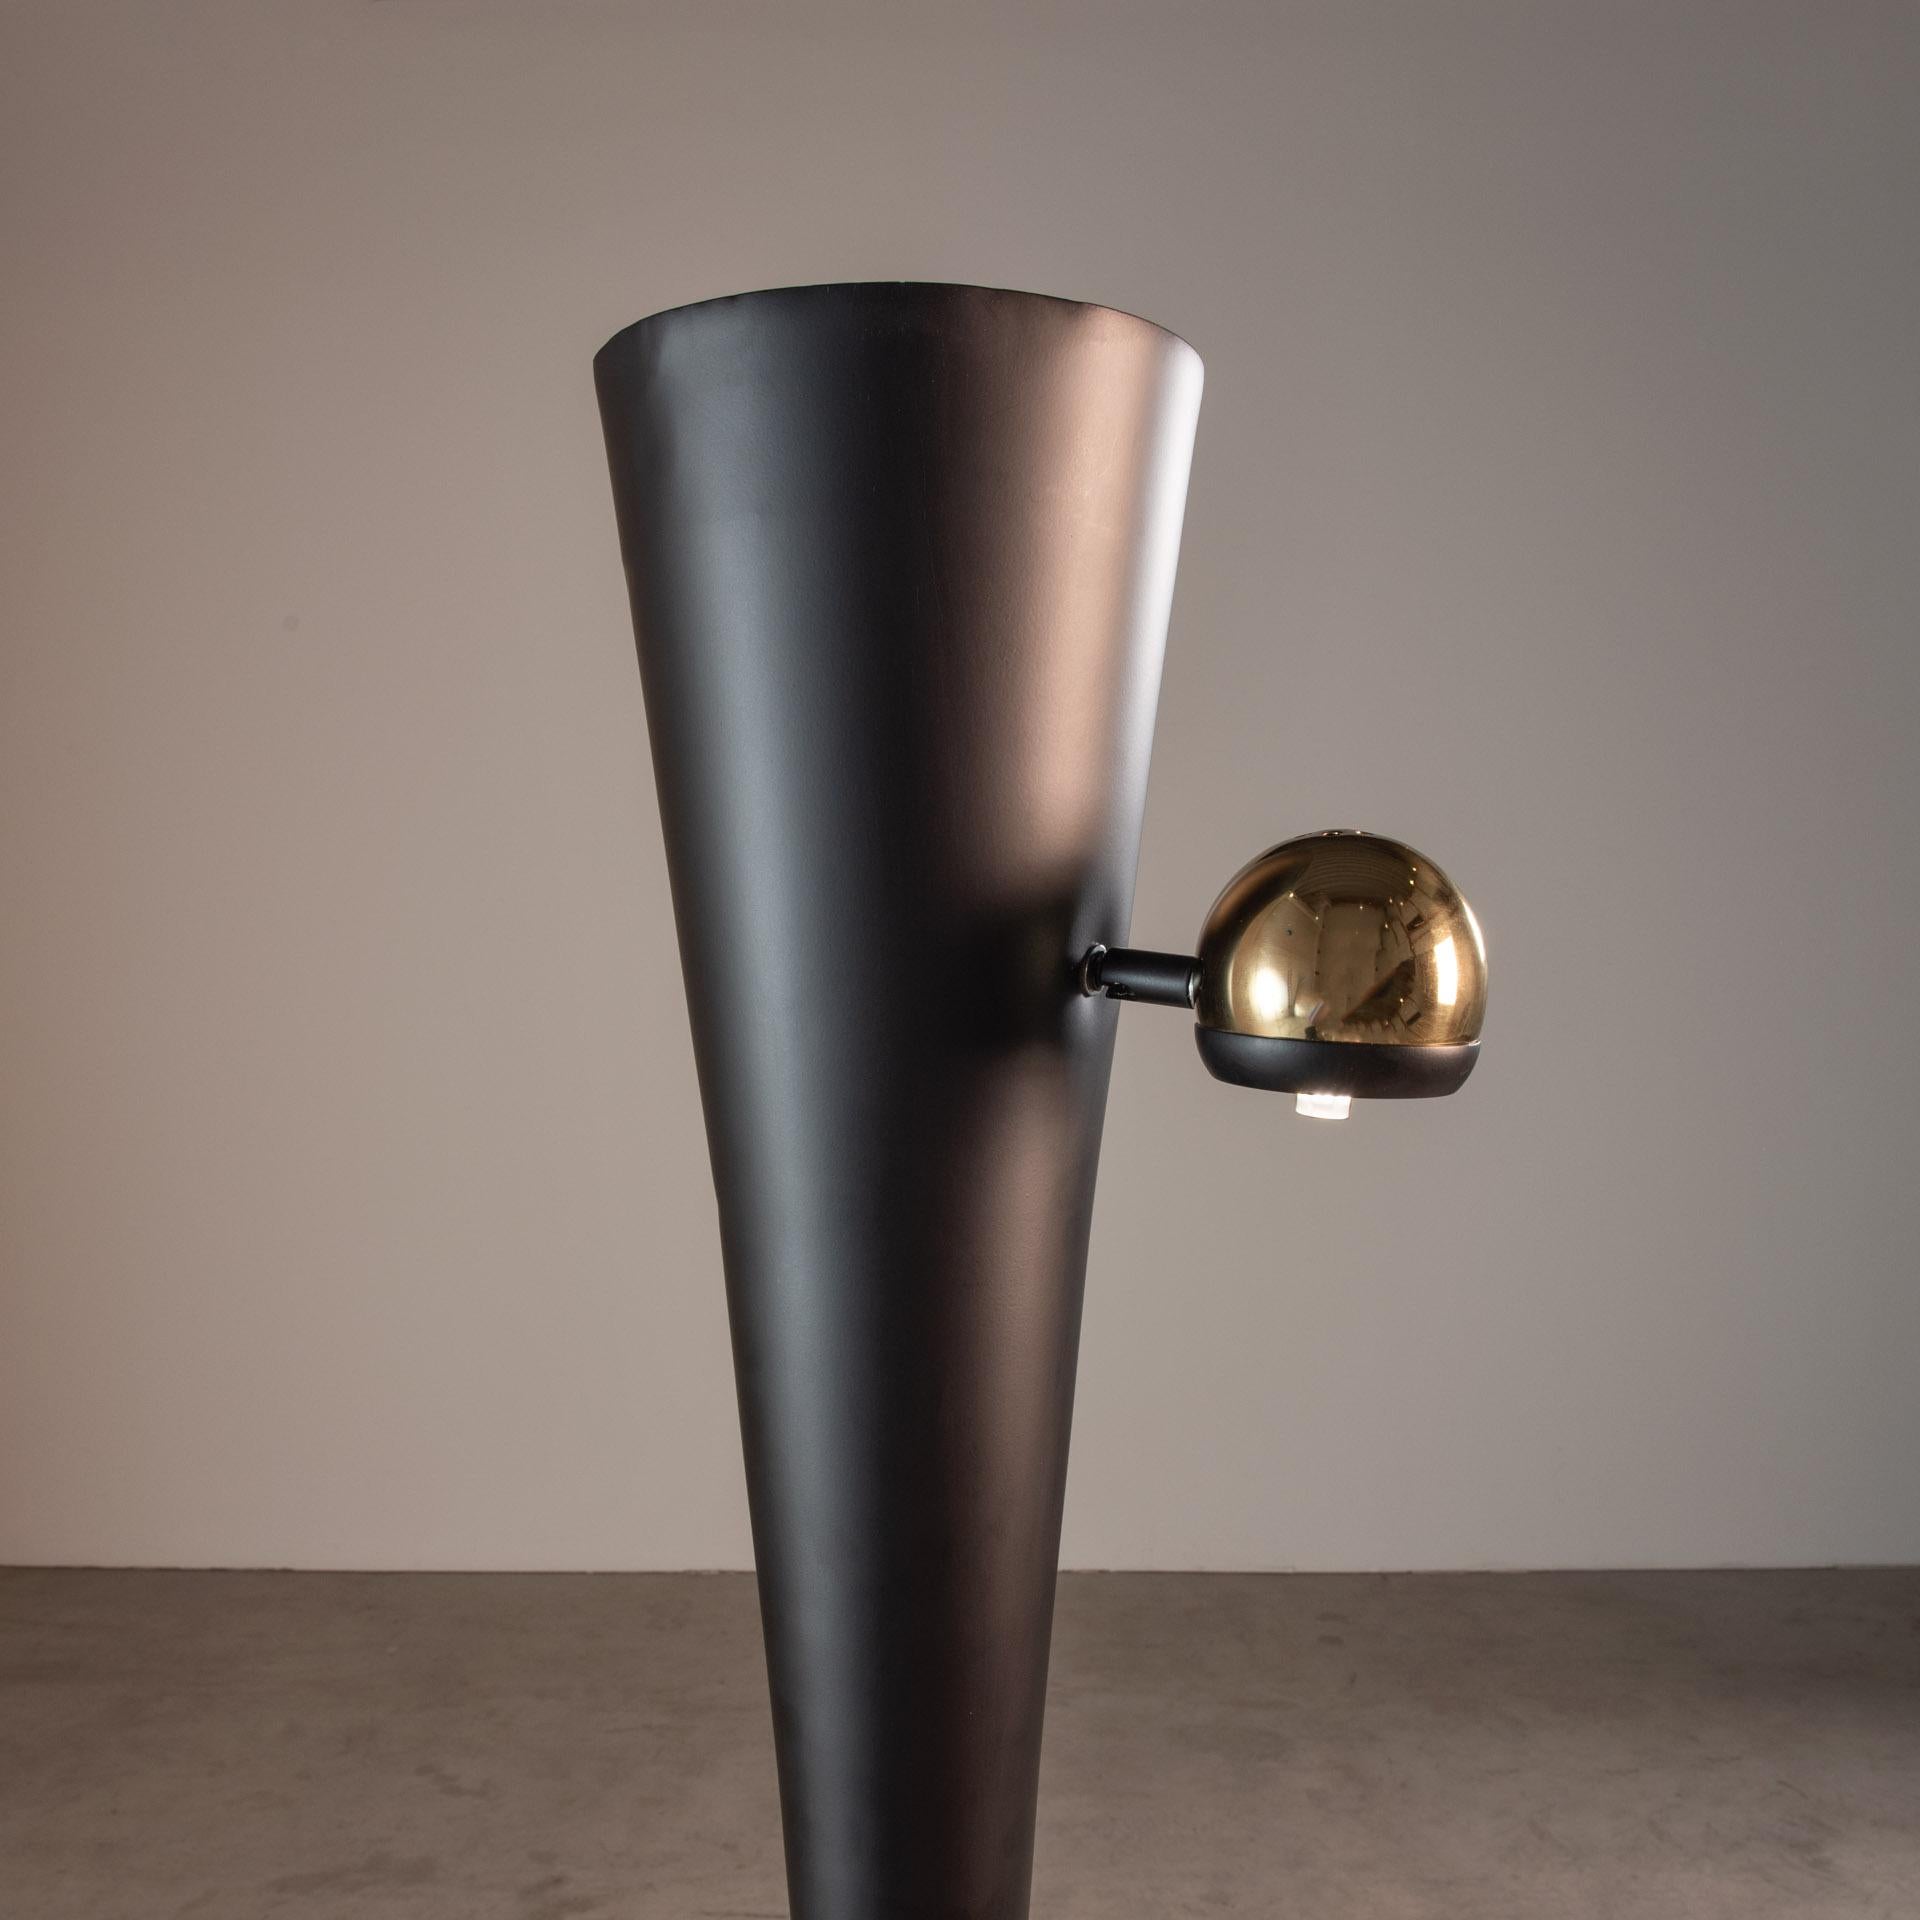 Floor Lamp in Brass and Steel, by Dominici, Mid-Century Brazilian Design Modern In Good Condition For Sale In Sao Paulo, SP